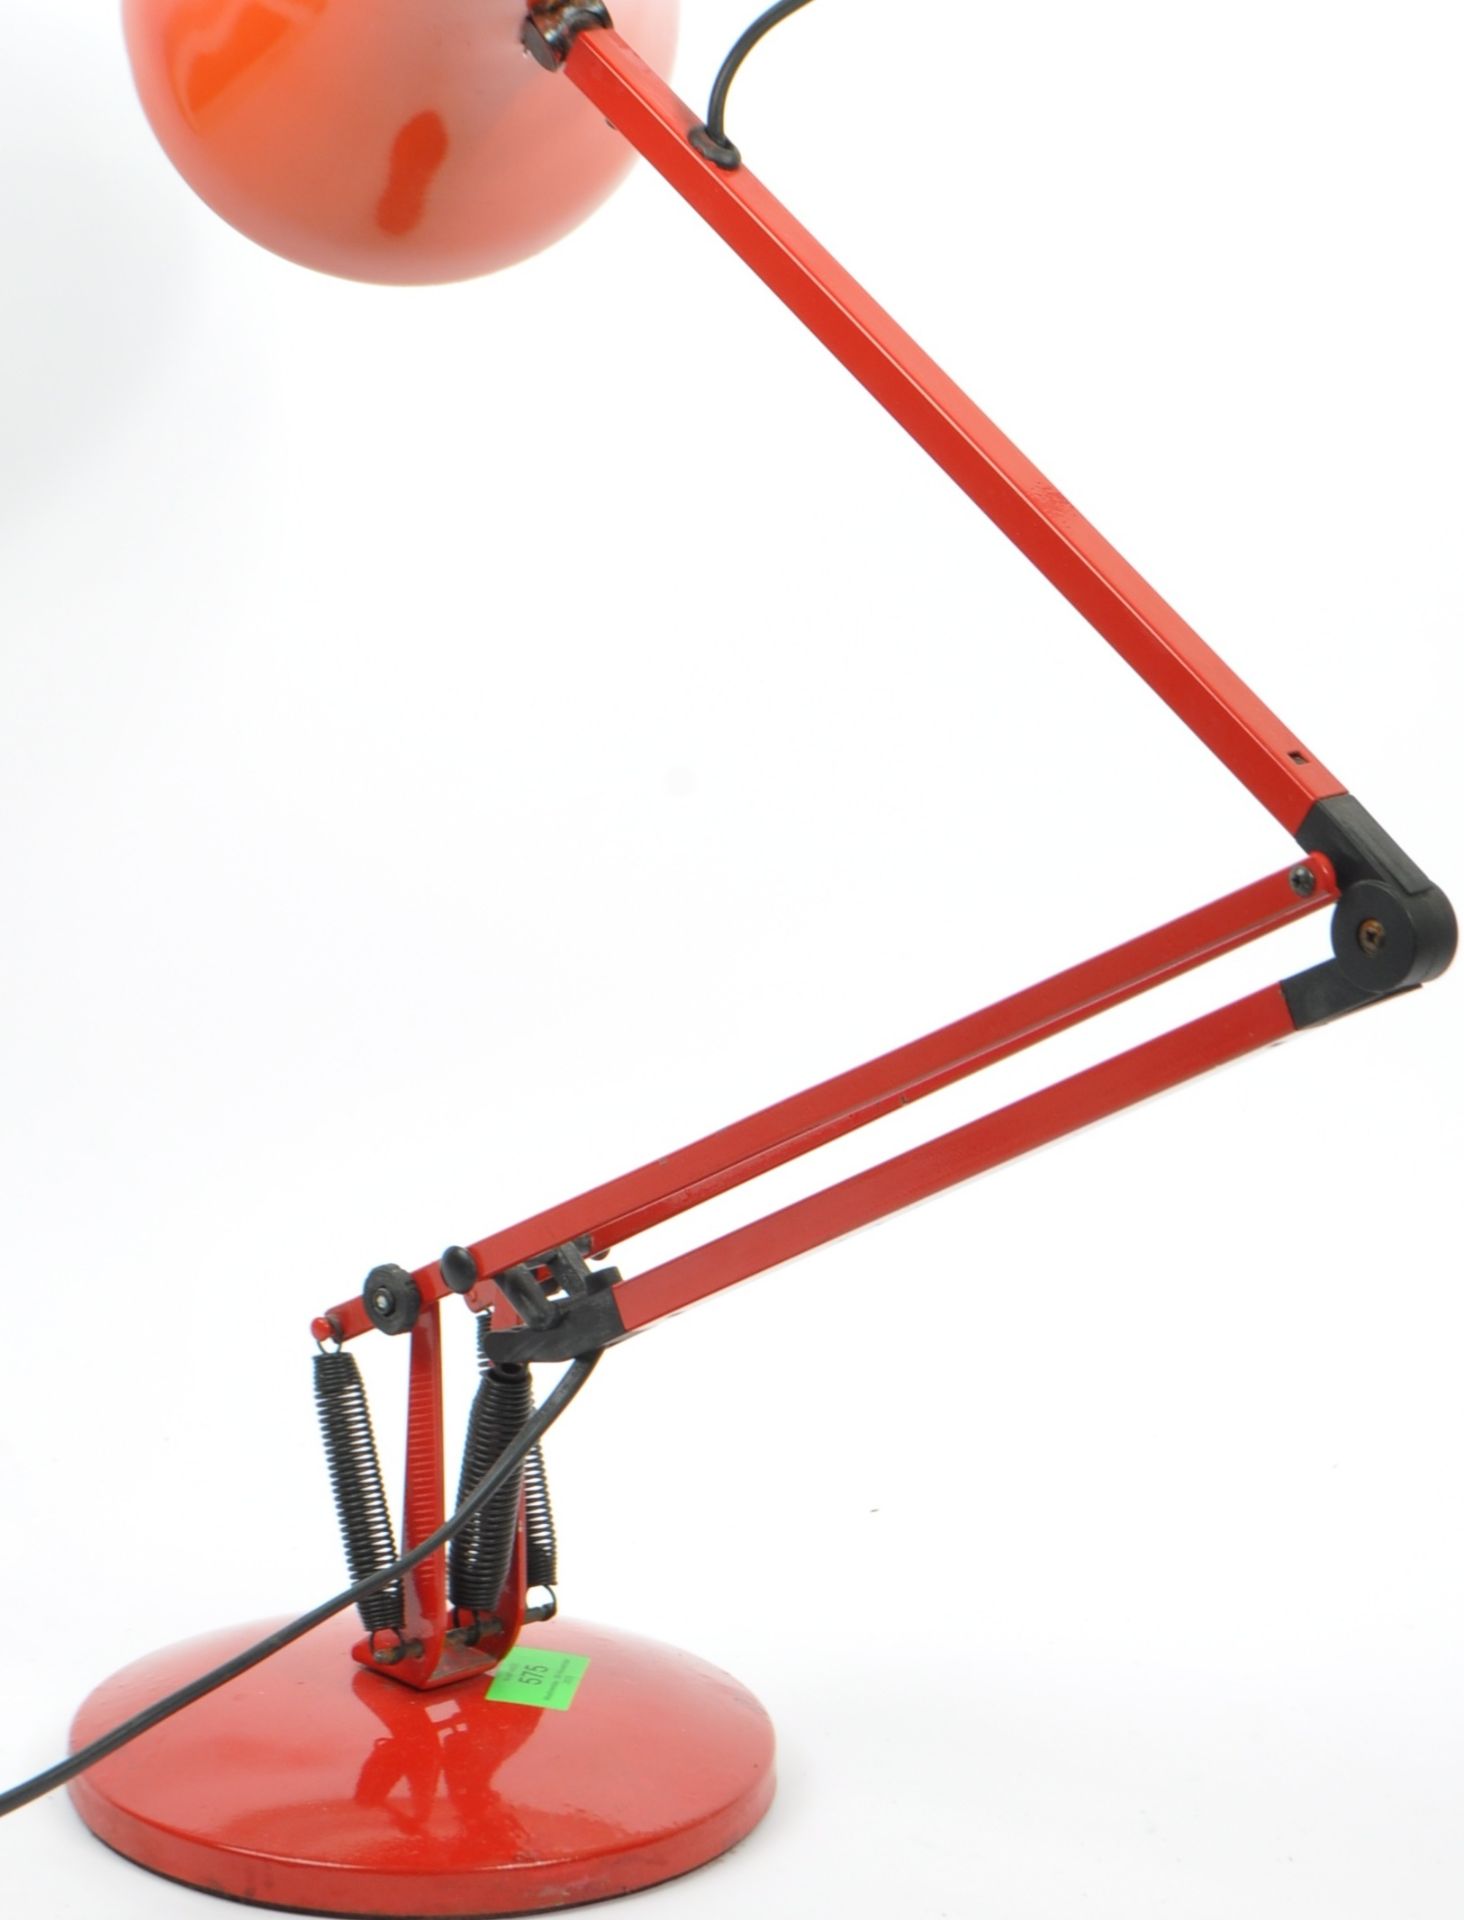 MID 20TH CENTURY ANGLEPOISE DESK TOP LAMP - Image 4 of 4